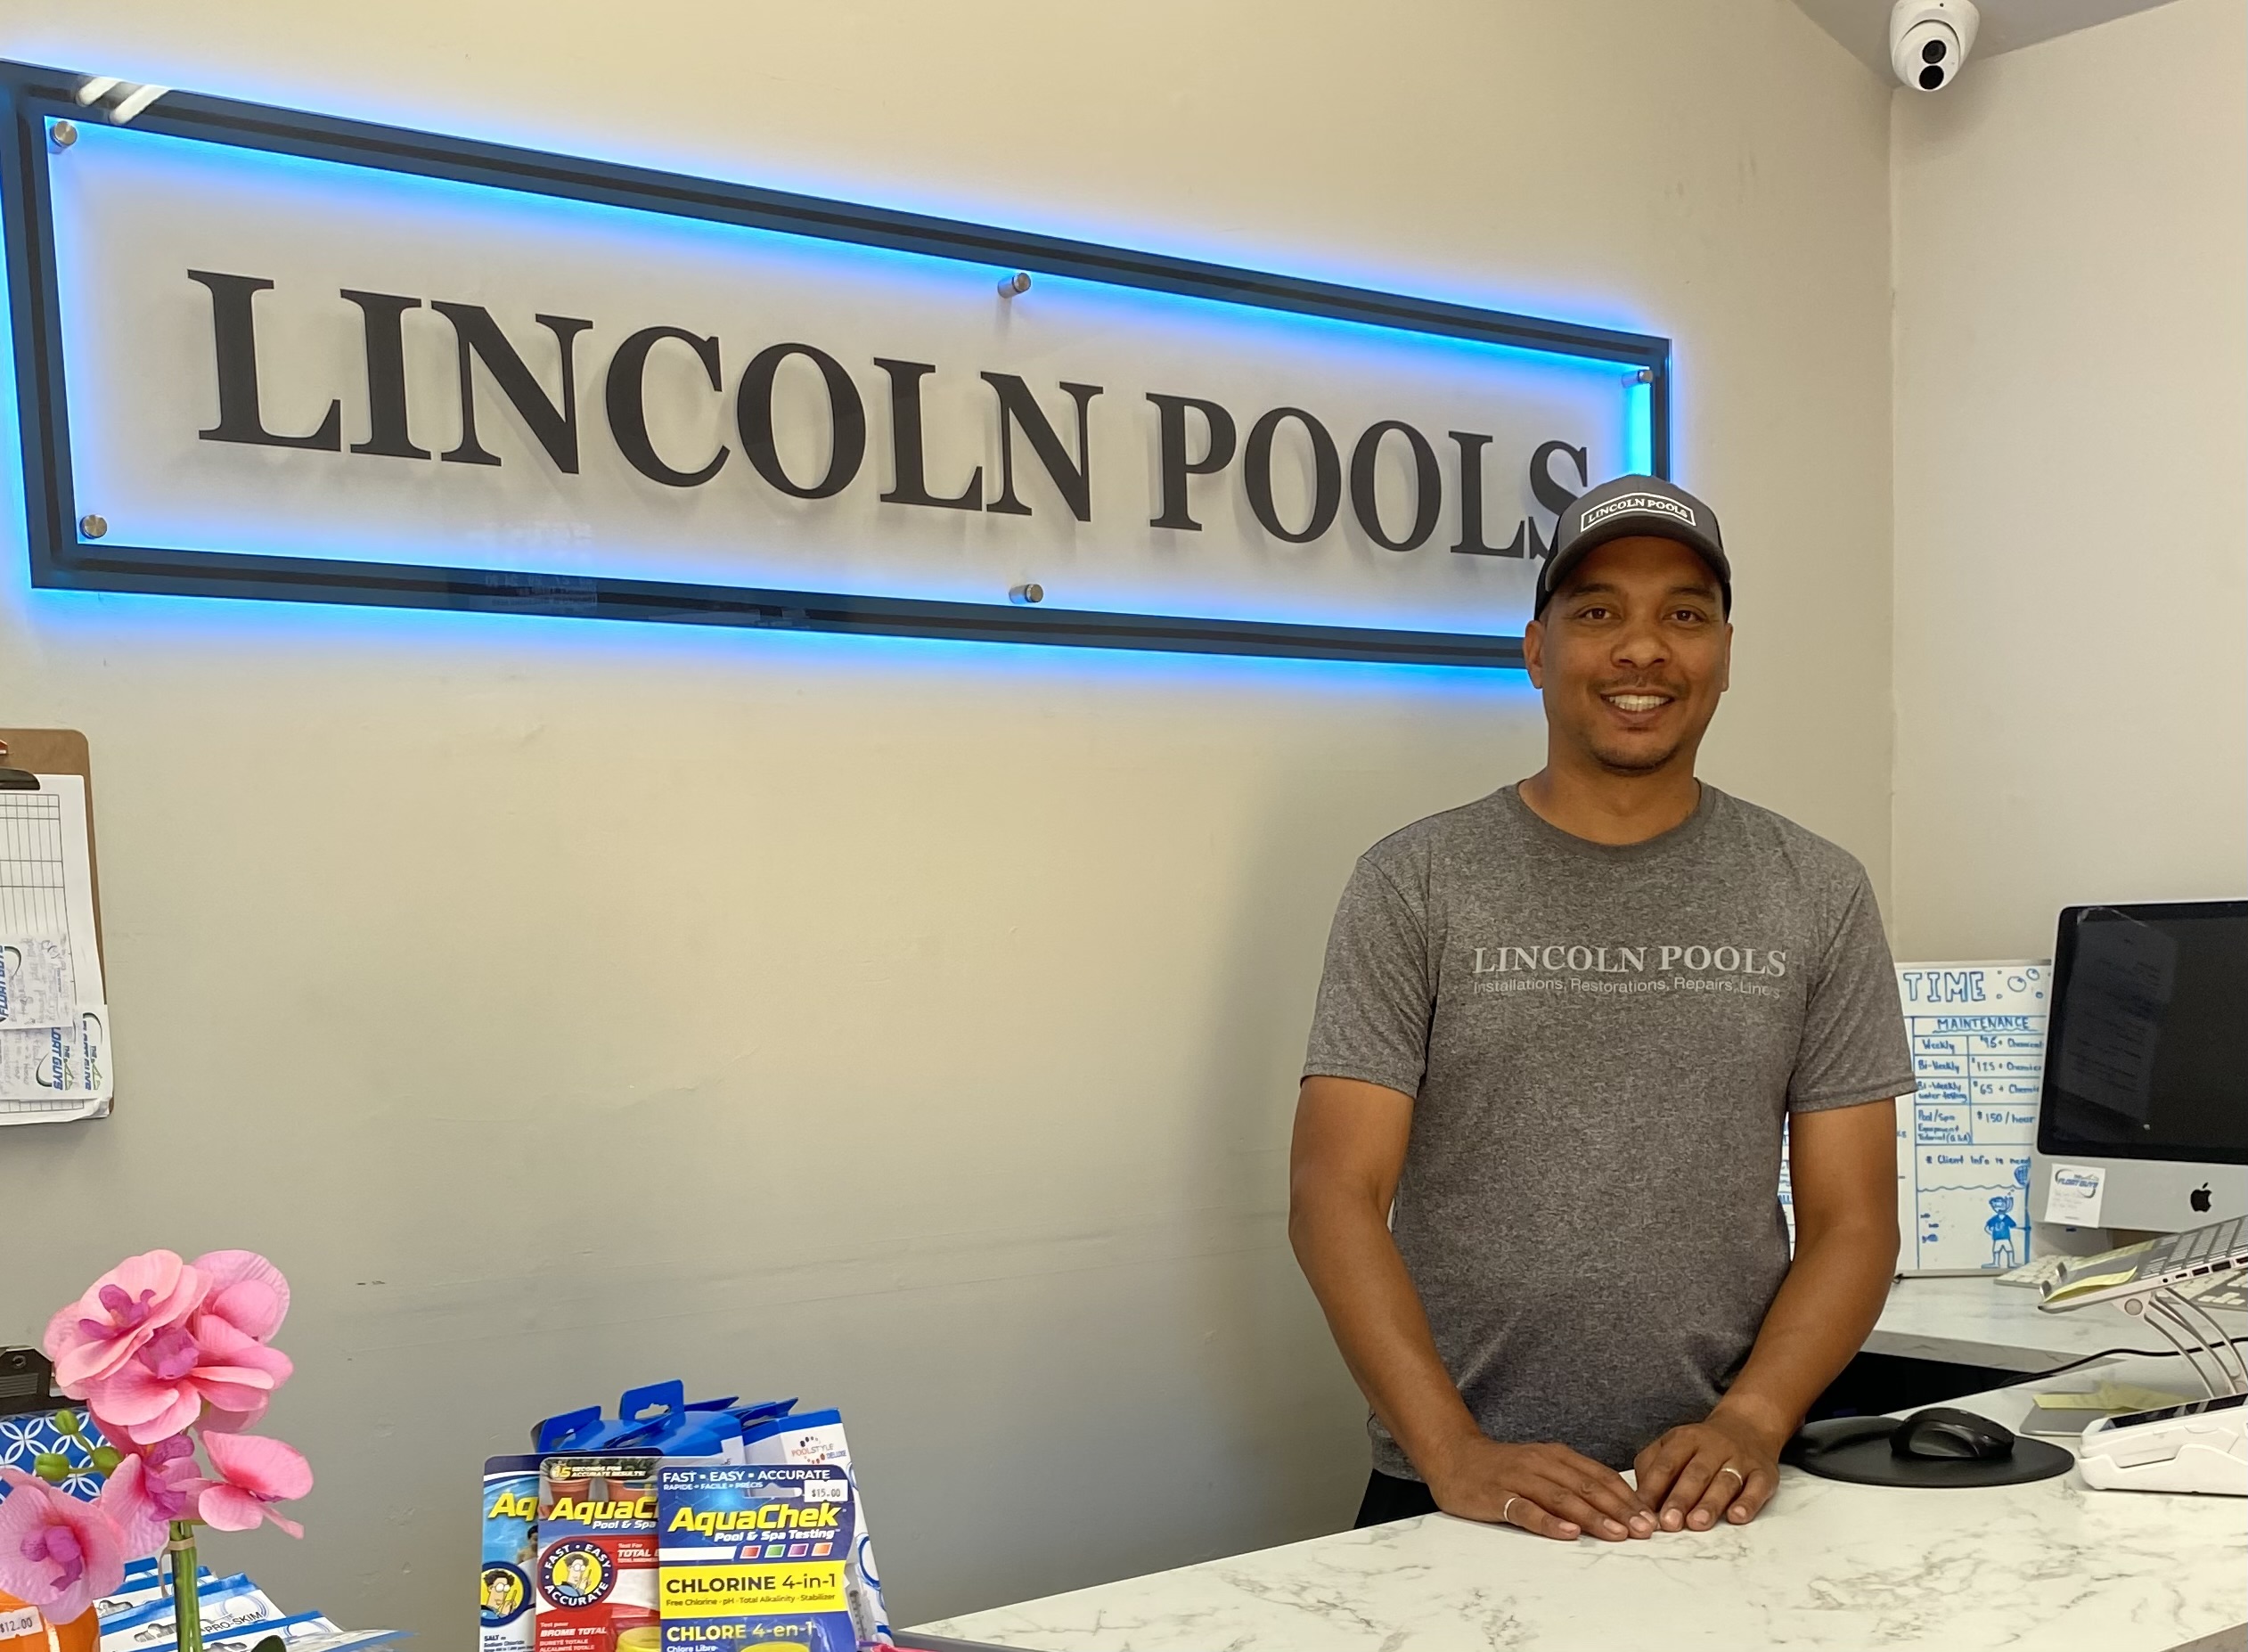 Chris owner of Lincoln Pools